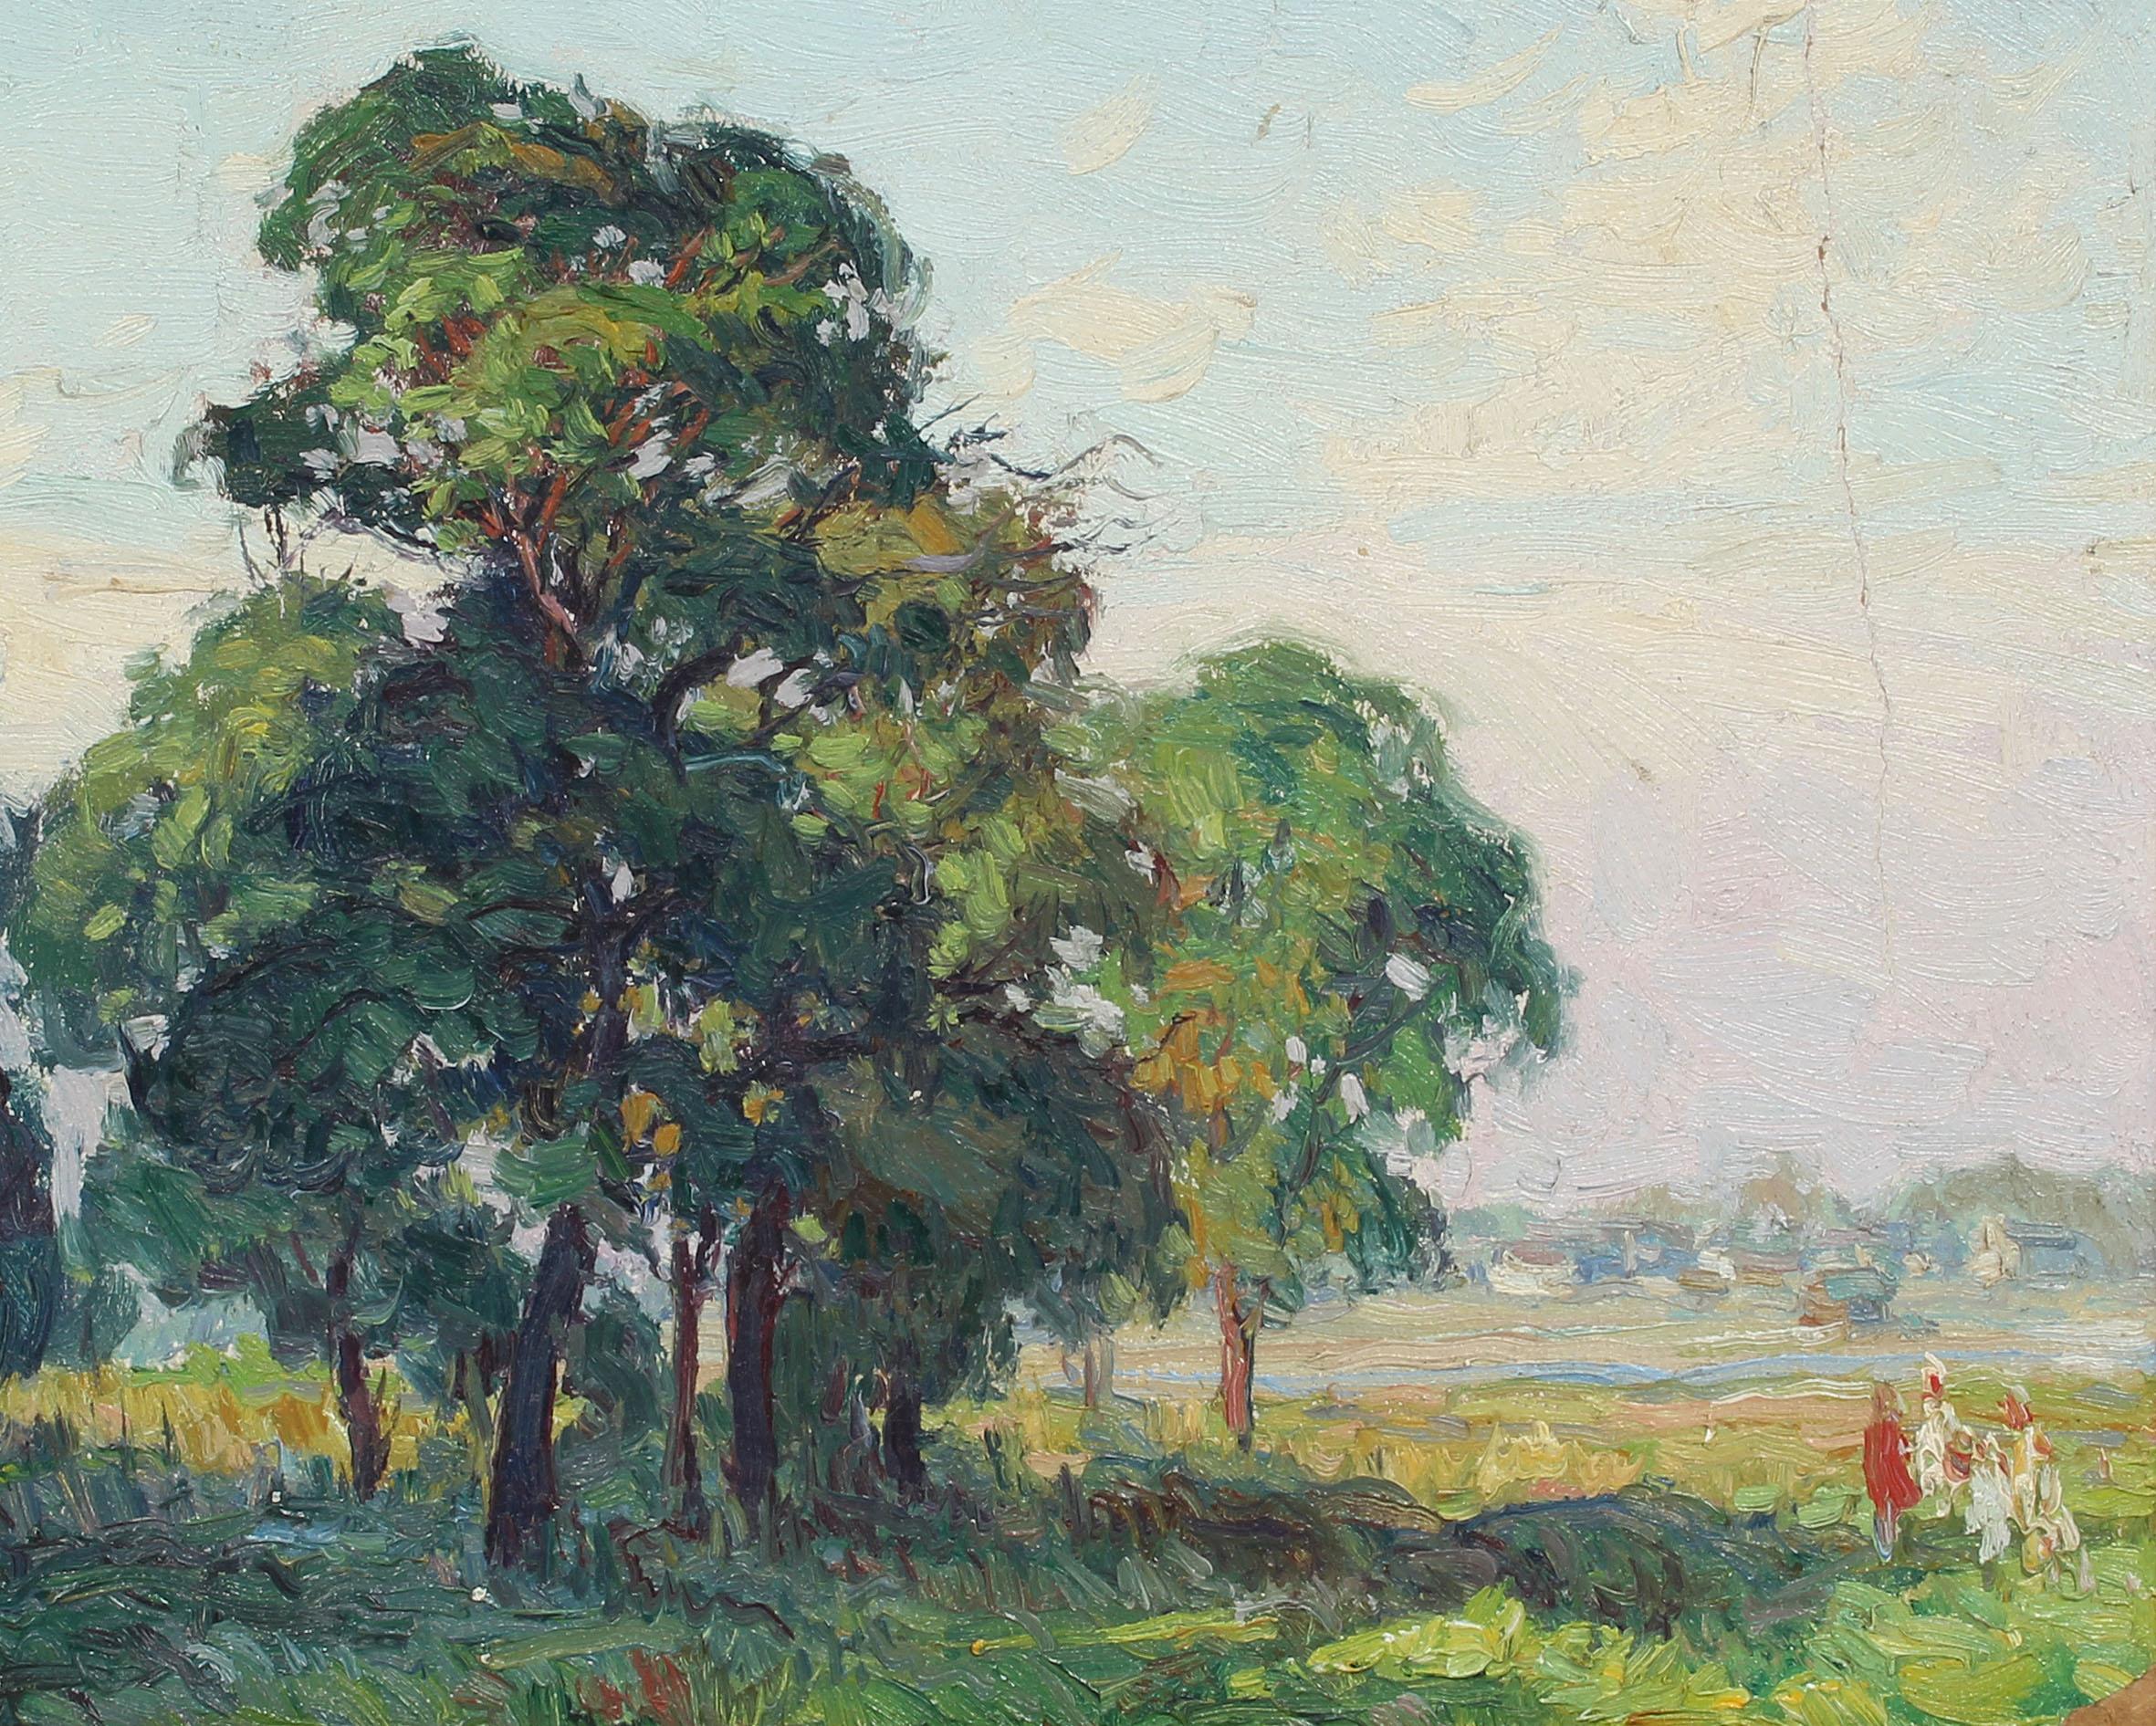 Oaks at Bergen Beach, NY Impressionist Summer Landscape Original Oil Painting - Brown Landscape Painting by George Renouard